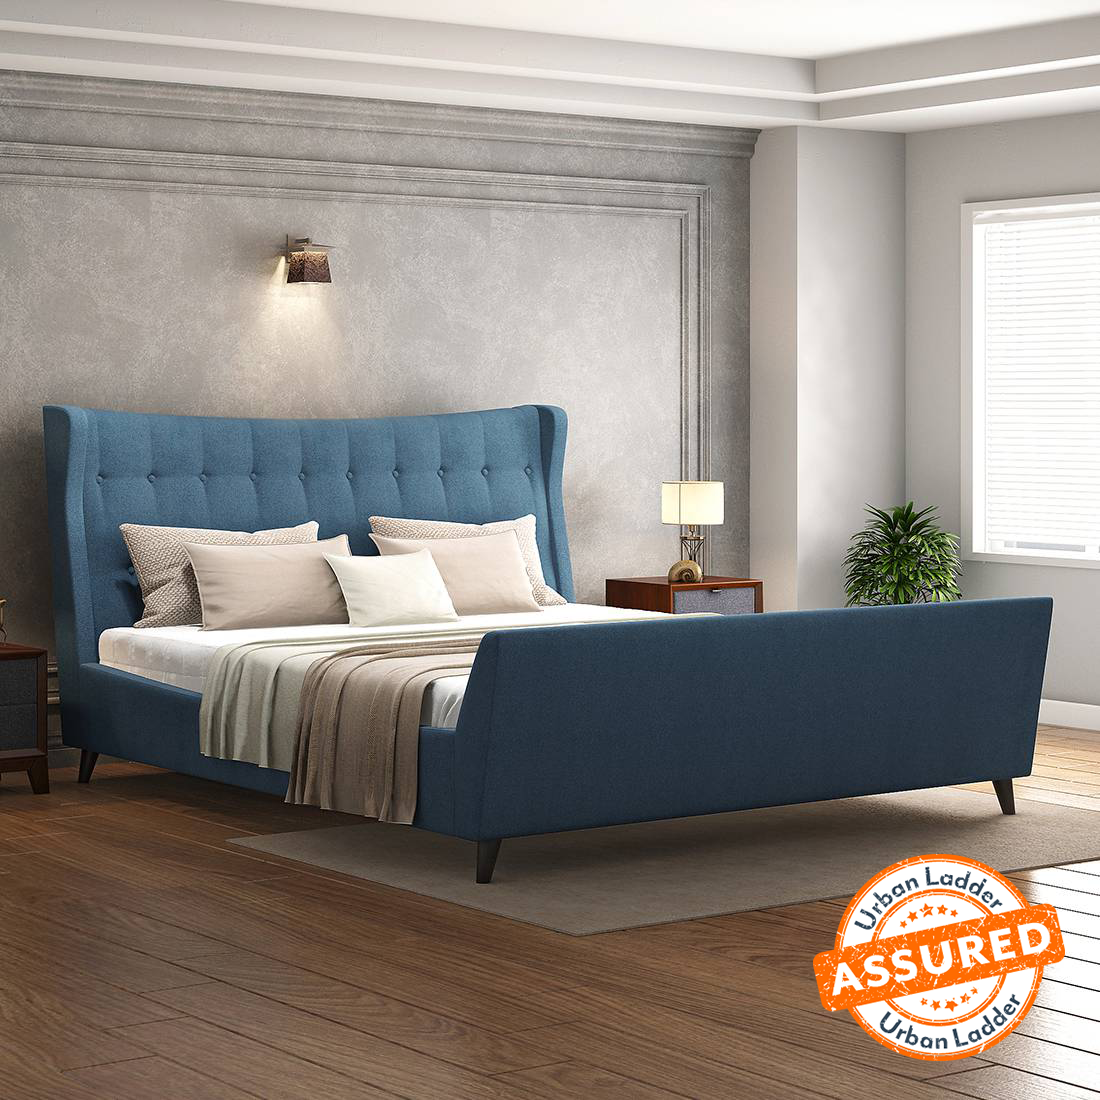 Buy King Size Beds Online and Get up to 50% Off